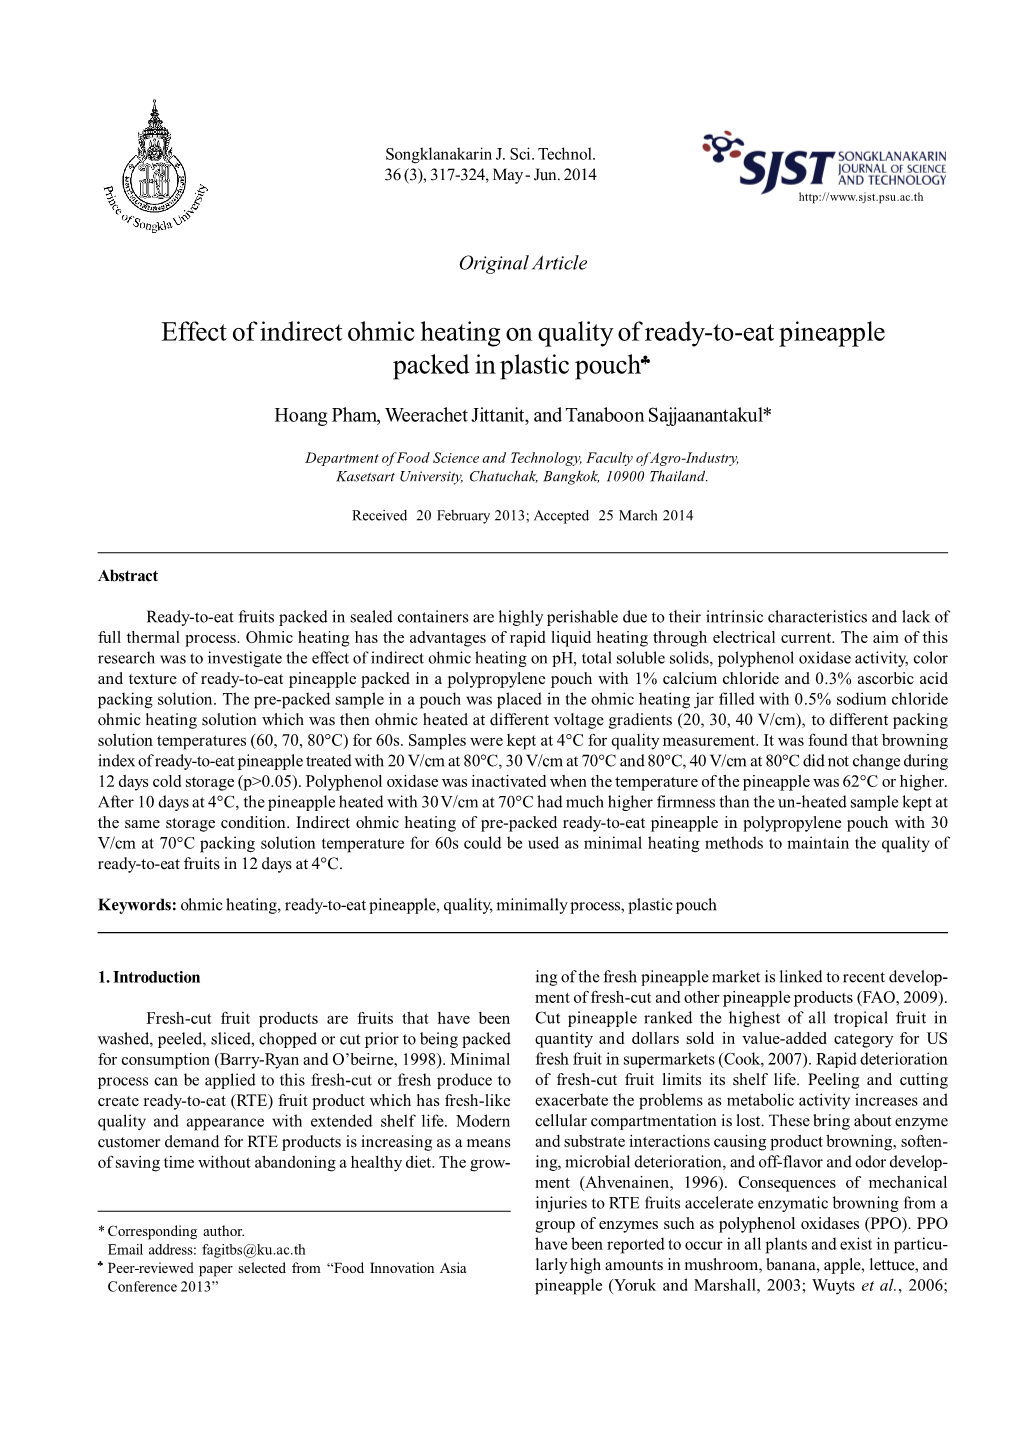 Effect of Indirect Ohmic Heating on Quality of Ready-To-Eat Pineapple Packed in Plastic Pouch